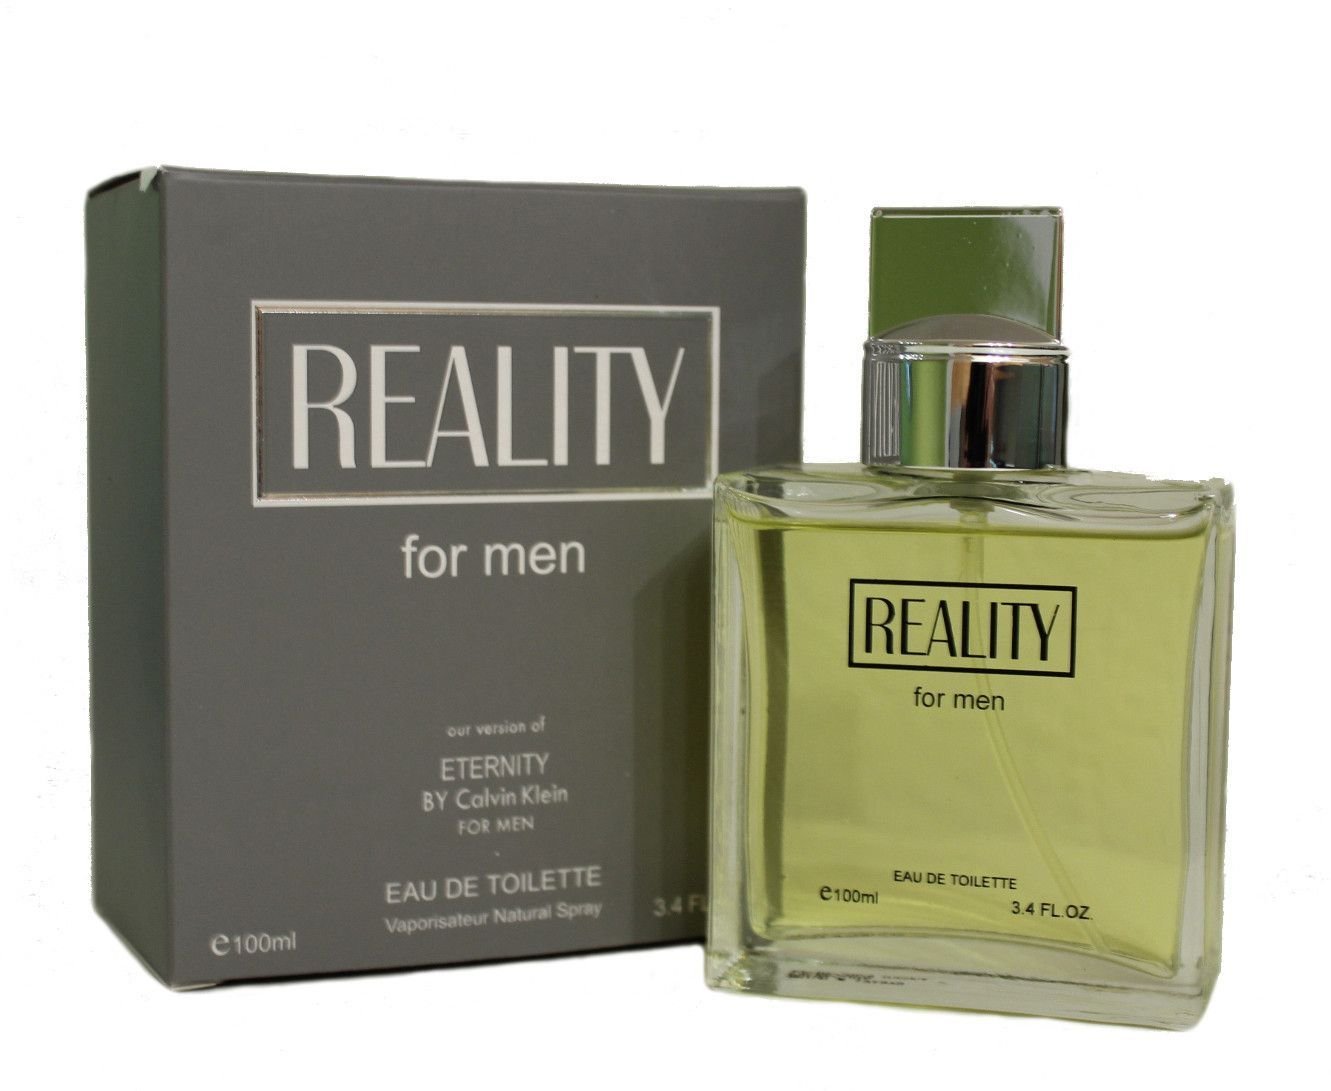 Reality for men by Calvin Klein